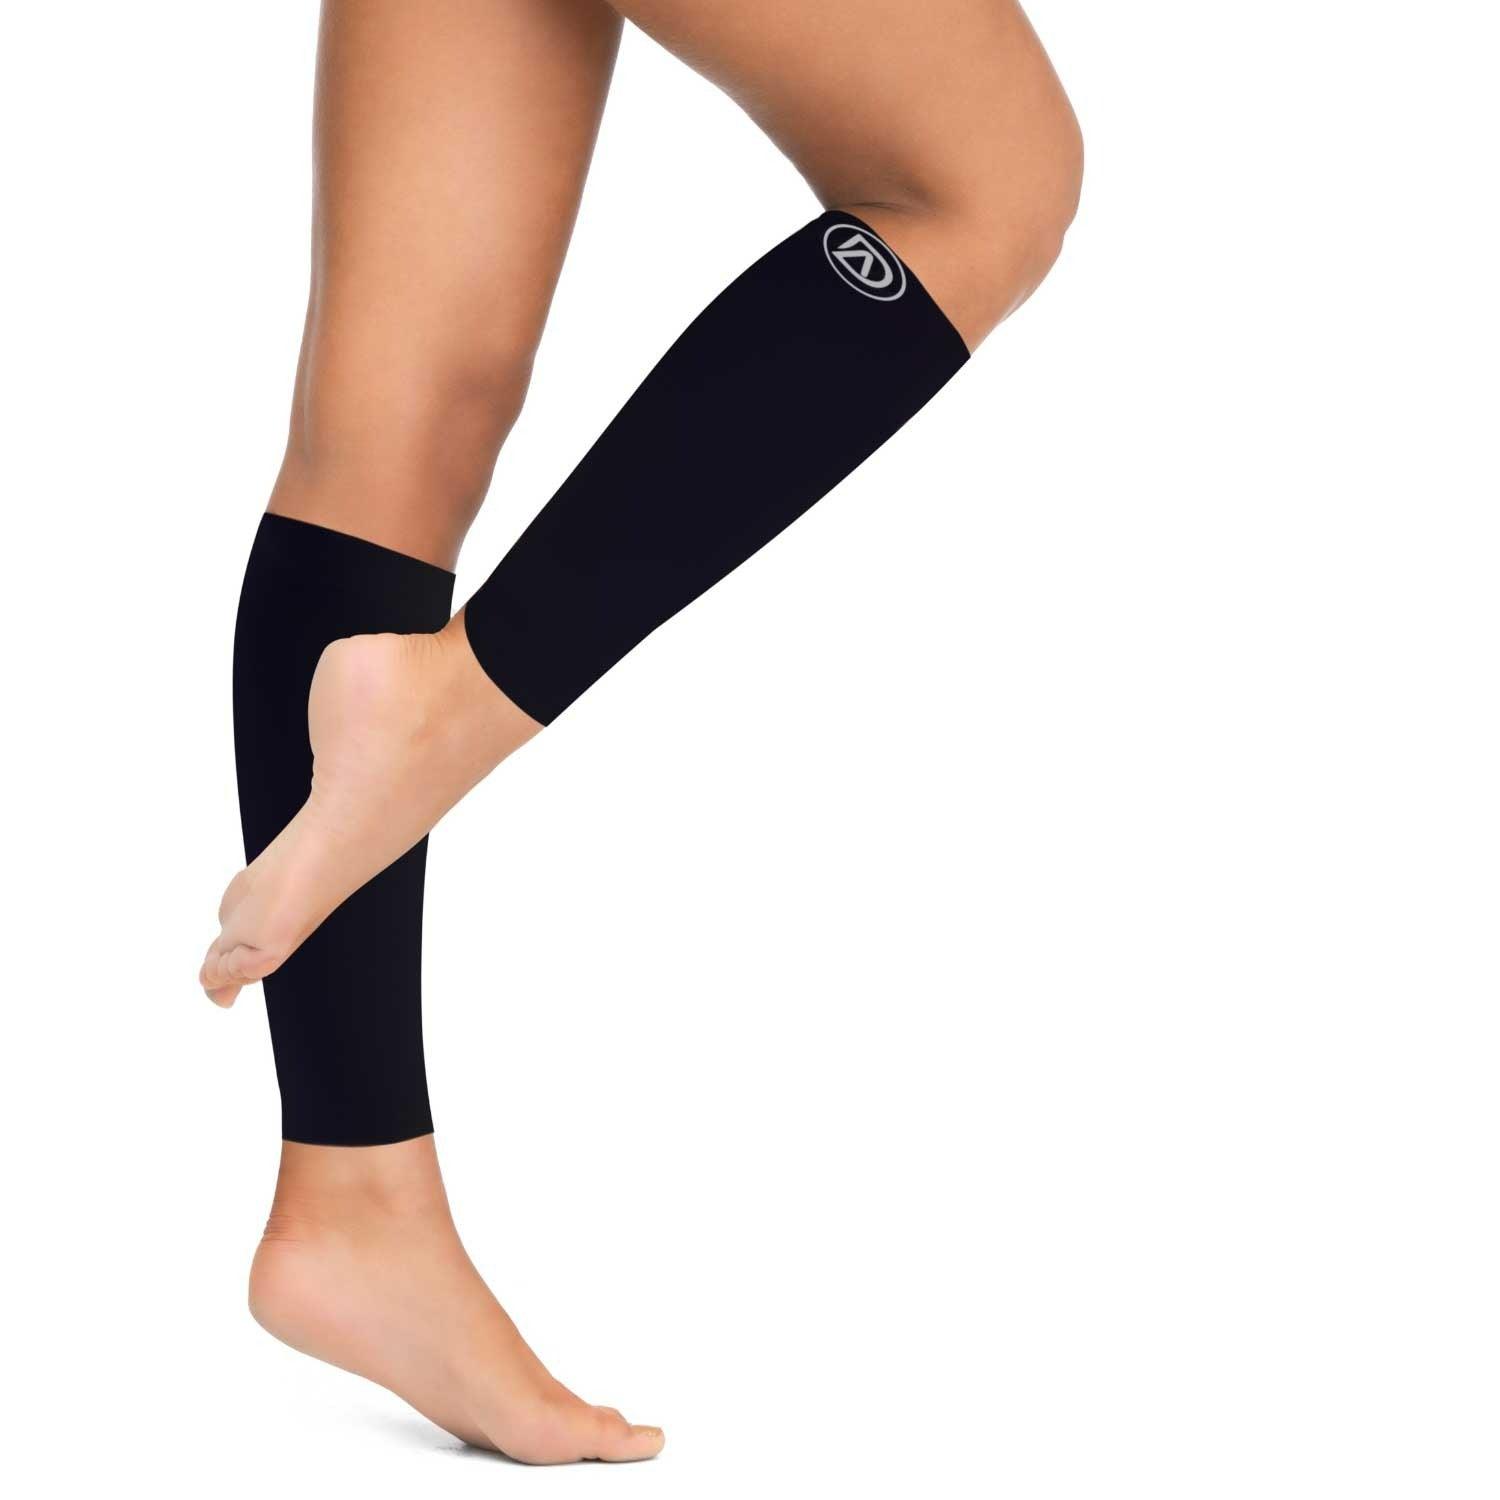 Aosijia 6XL Plus Size Calf Compression Sleeve for Women & Men, Extra Wide Leg  Support for Shin Splints, Leg Pain Relief and Support Circulation,  Swelling, Travel, Work, Sports and Daily Wear, Beige 